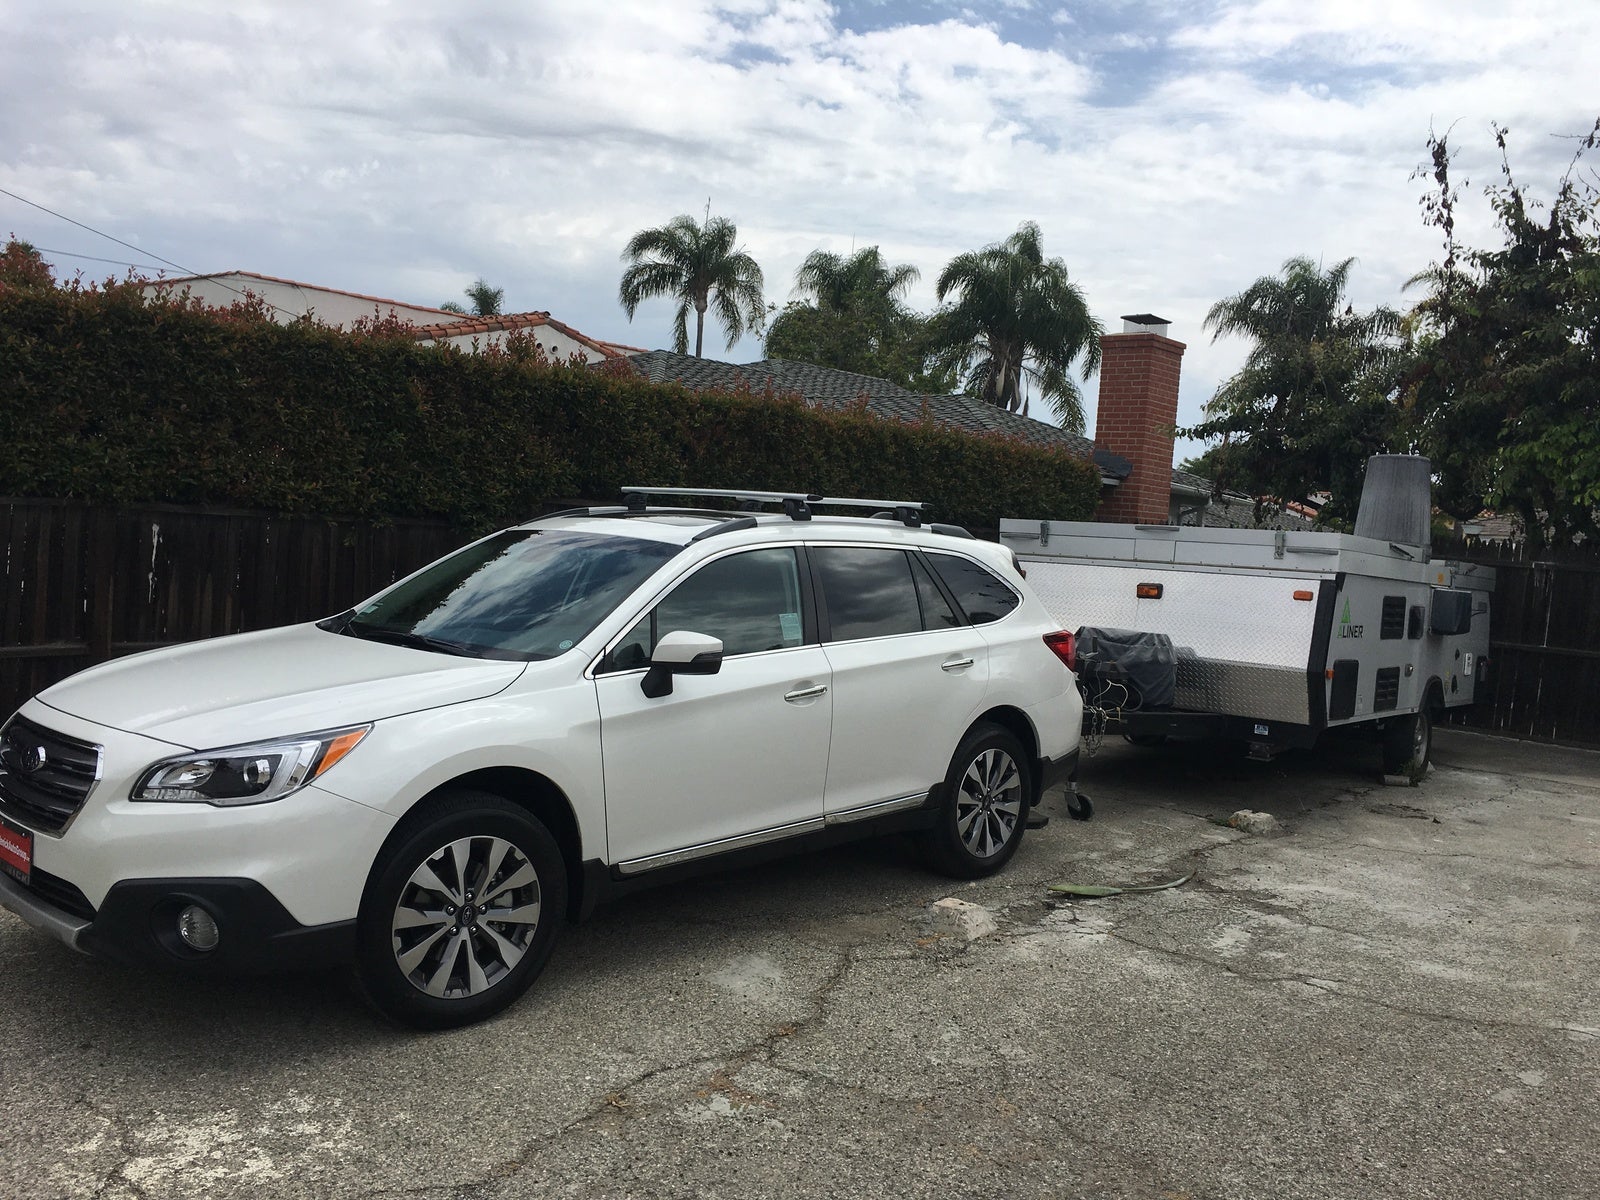 Subaru Outback Questions - Towing with Outback Limited 2.5i, 4 cylinder - CarGurus 2011 Subaru Outback 2.5 I Towing Capacity